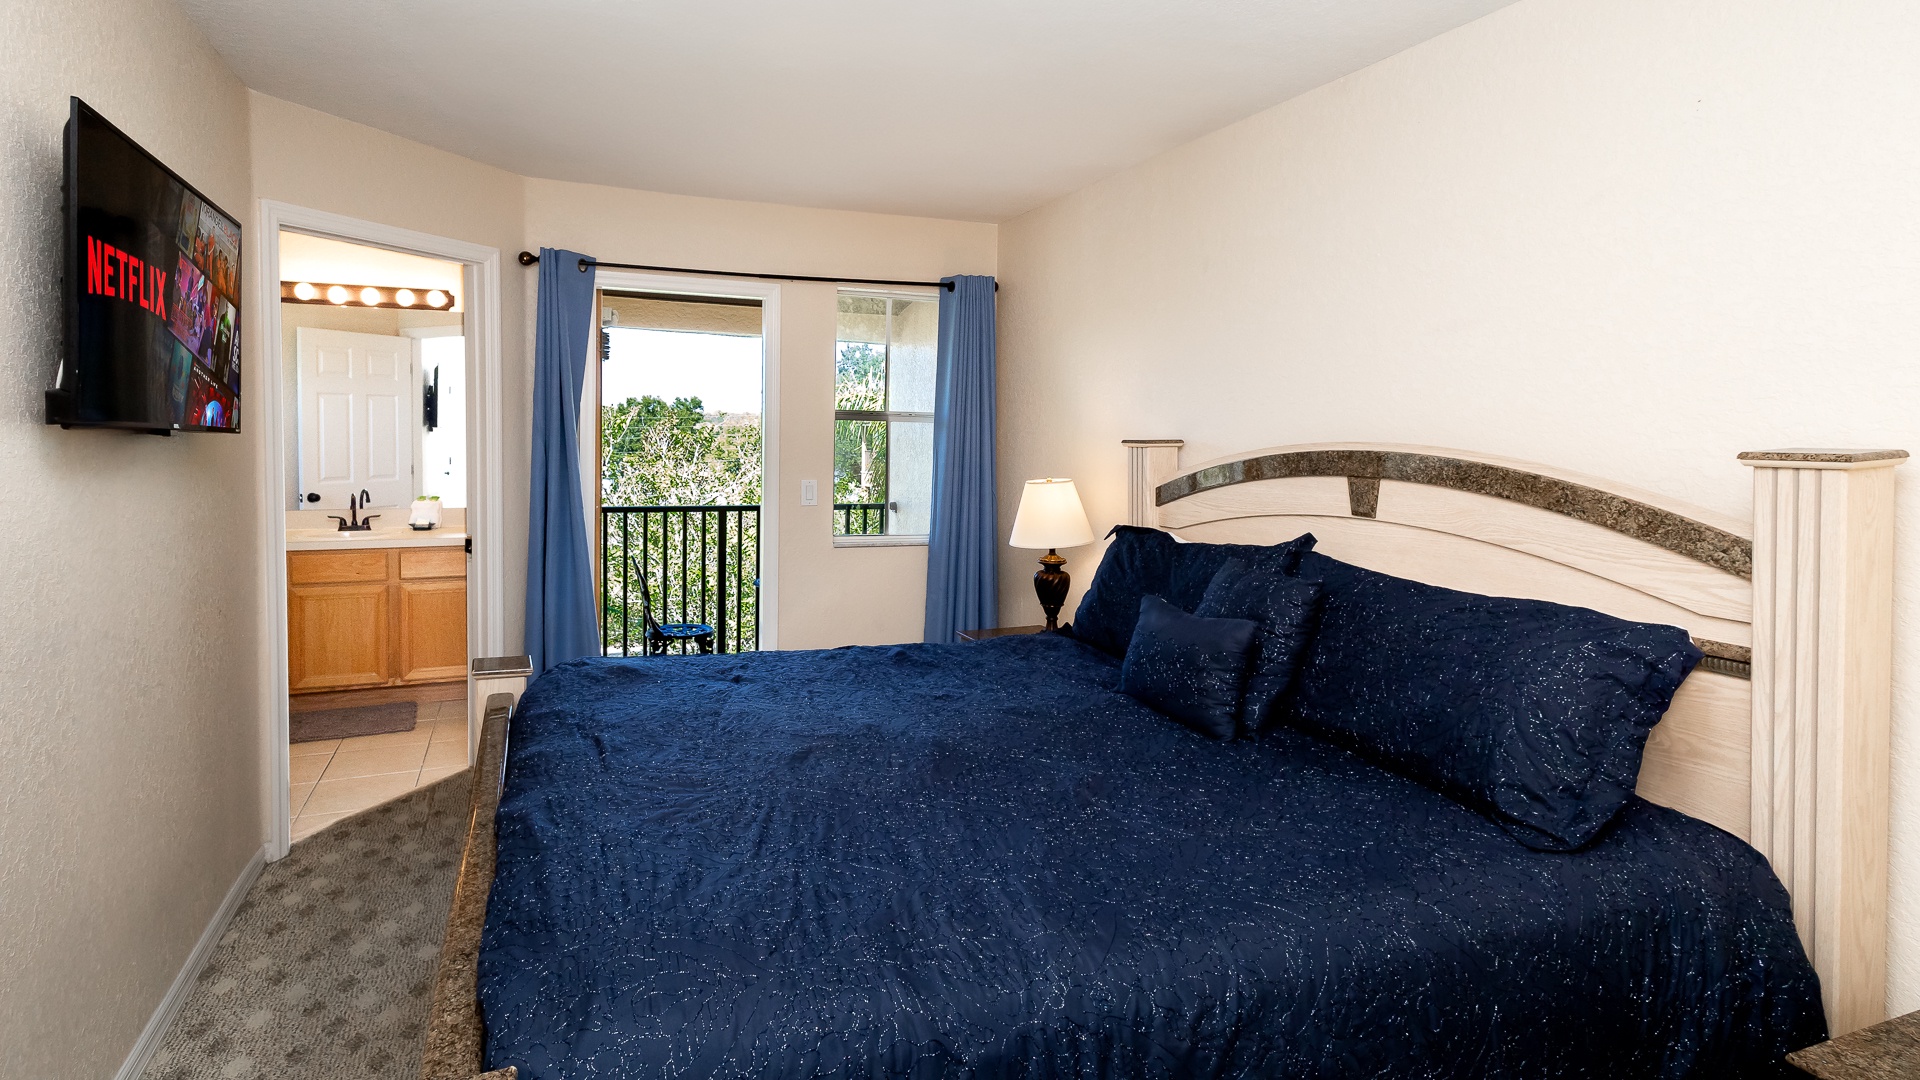 The 2nd floor king suite boasts a private en suite, Smart TV, & balcony access